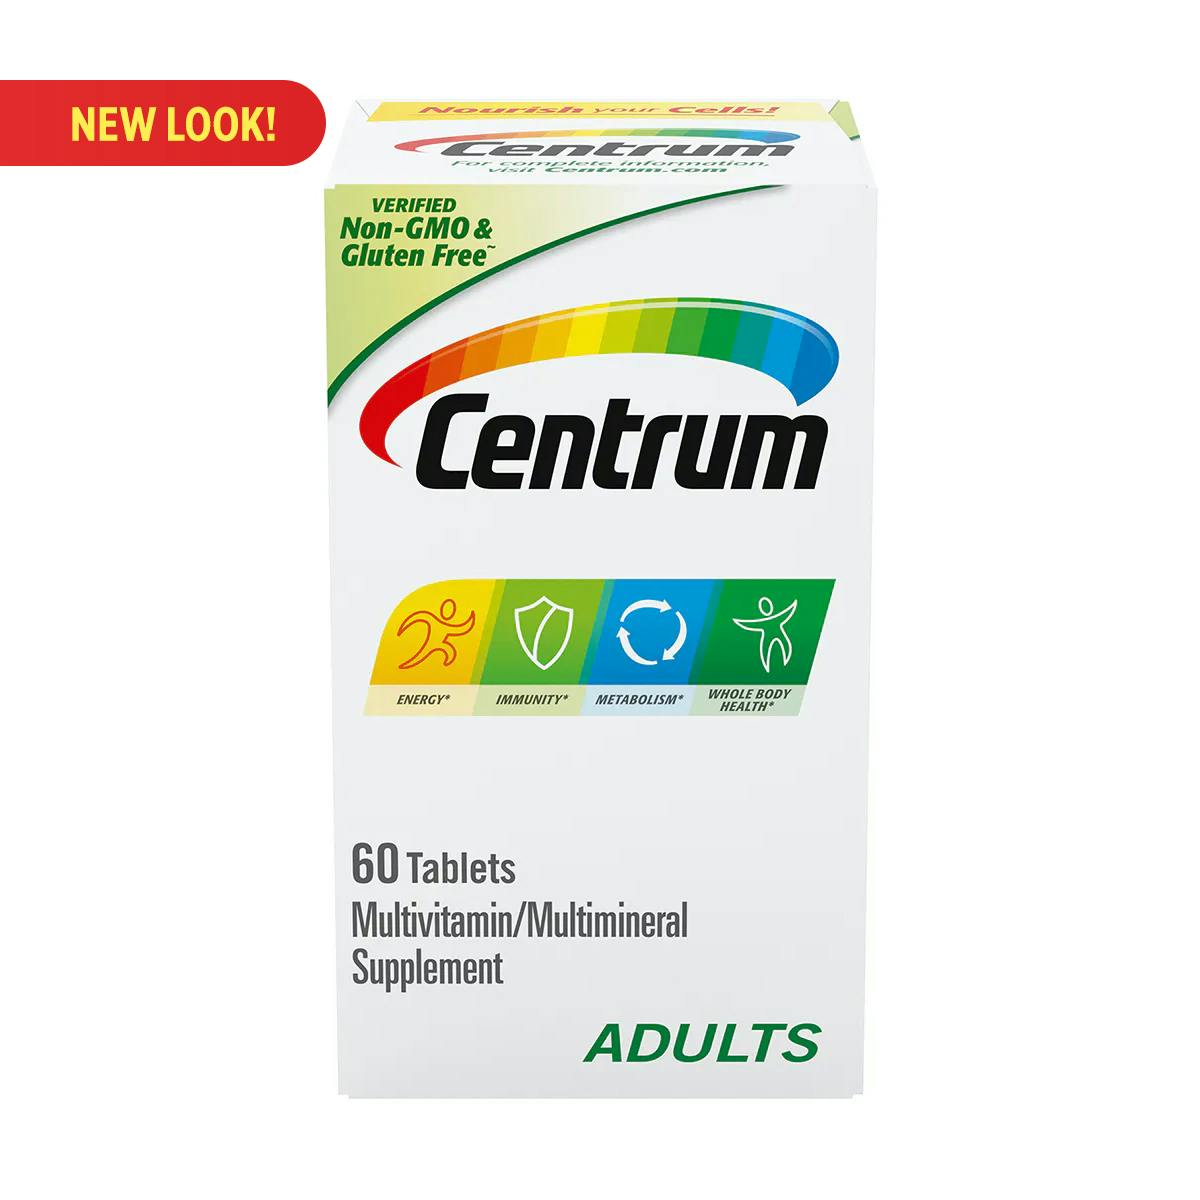 Centrum Adults multivitamins - previous packaging